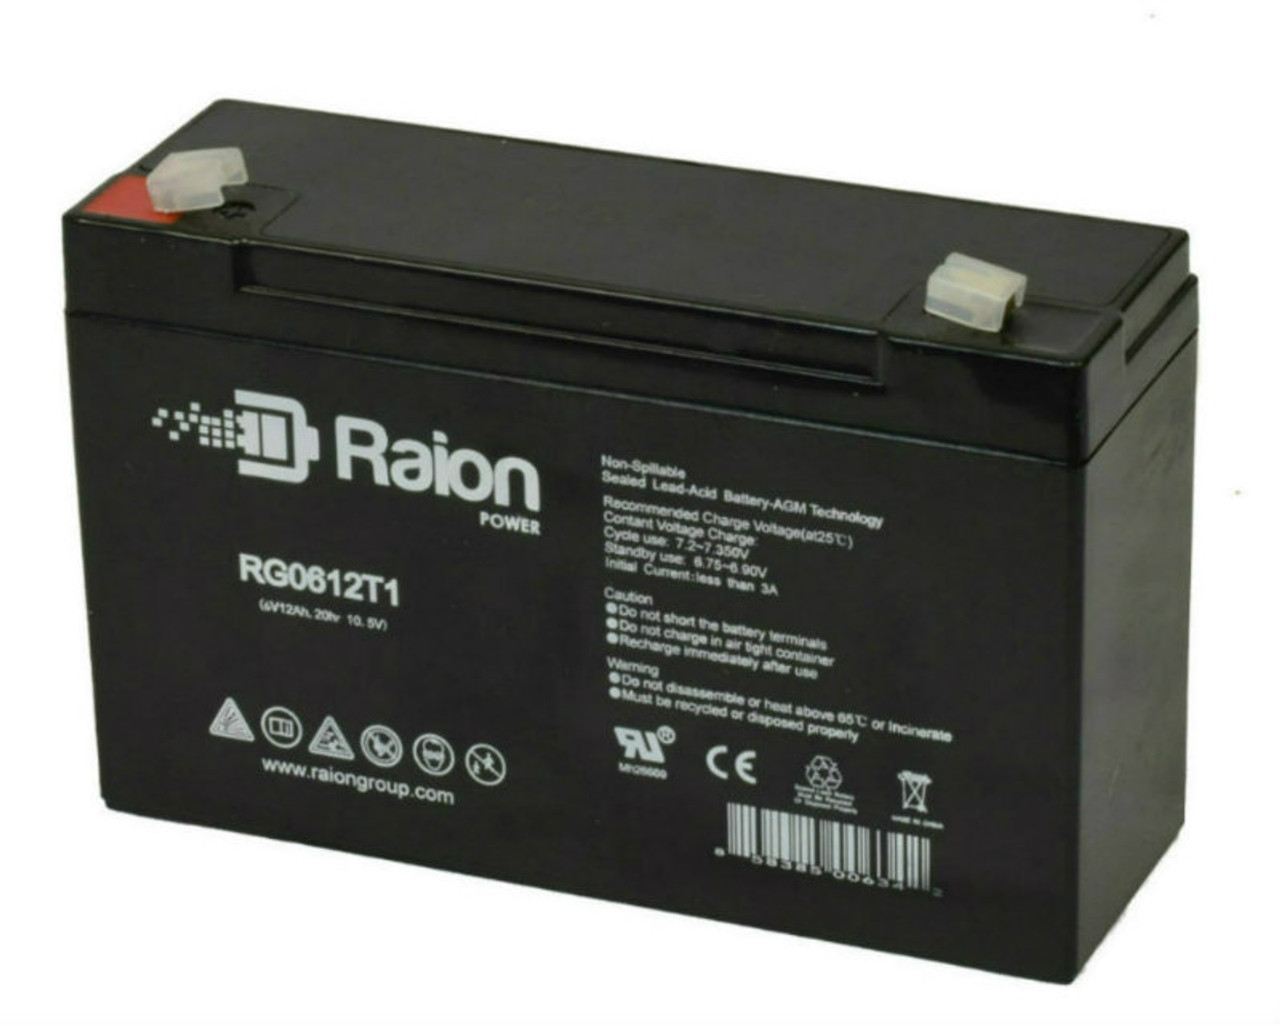 Raion Power RG06120T1 6V 12Ah Replacement UPS Battery Cartridge for Powerware PW5119-1000i